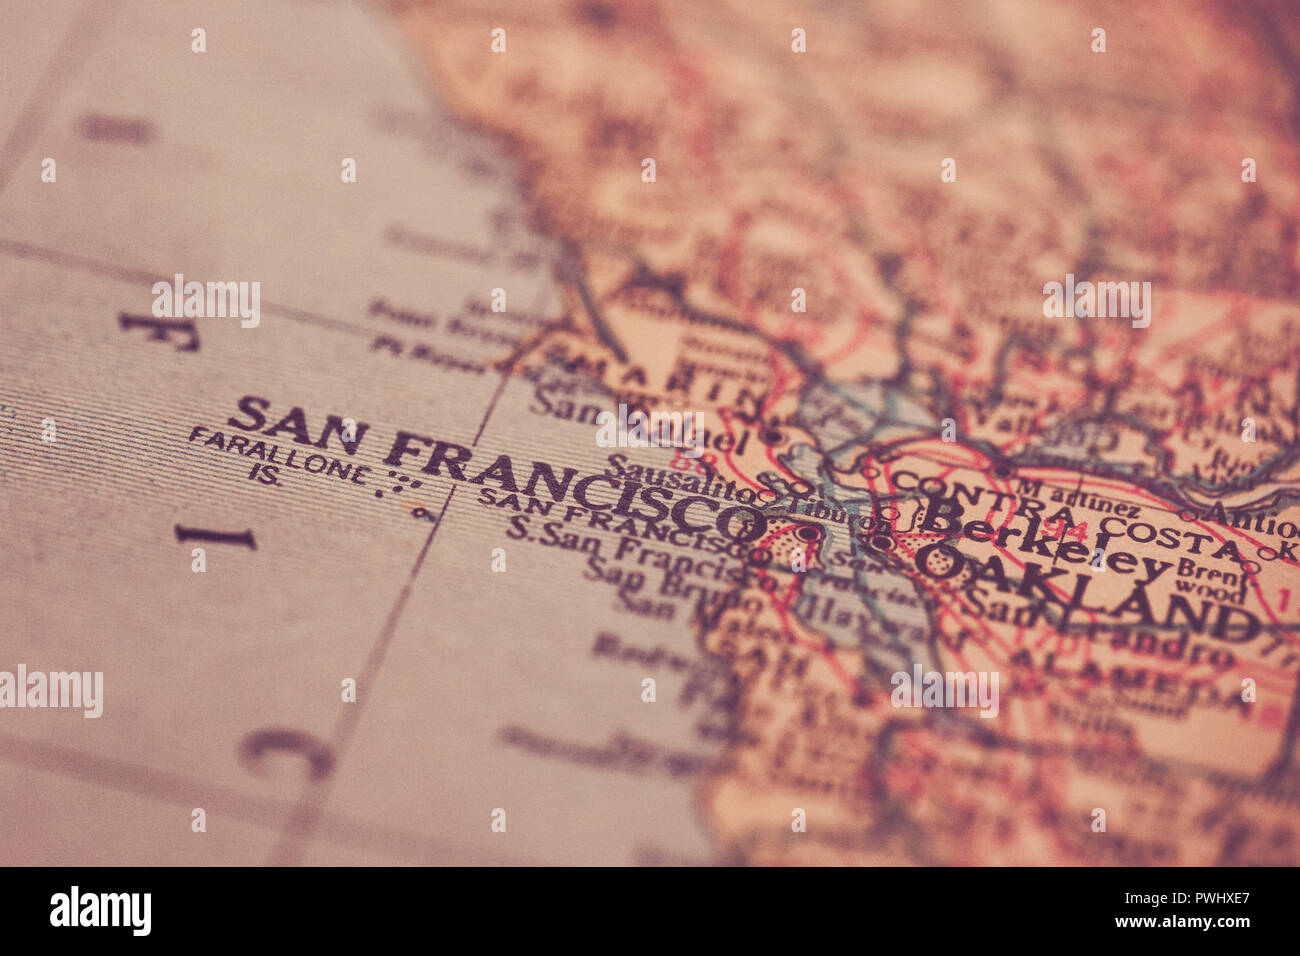 San Francisco, California is the center of focus on an old map. Stock Photo